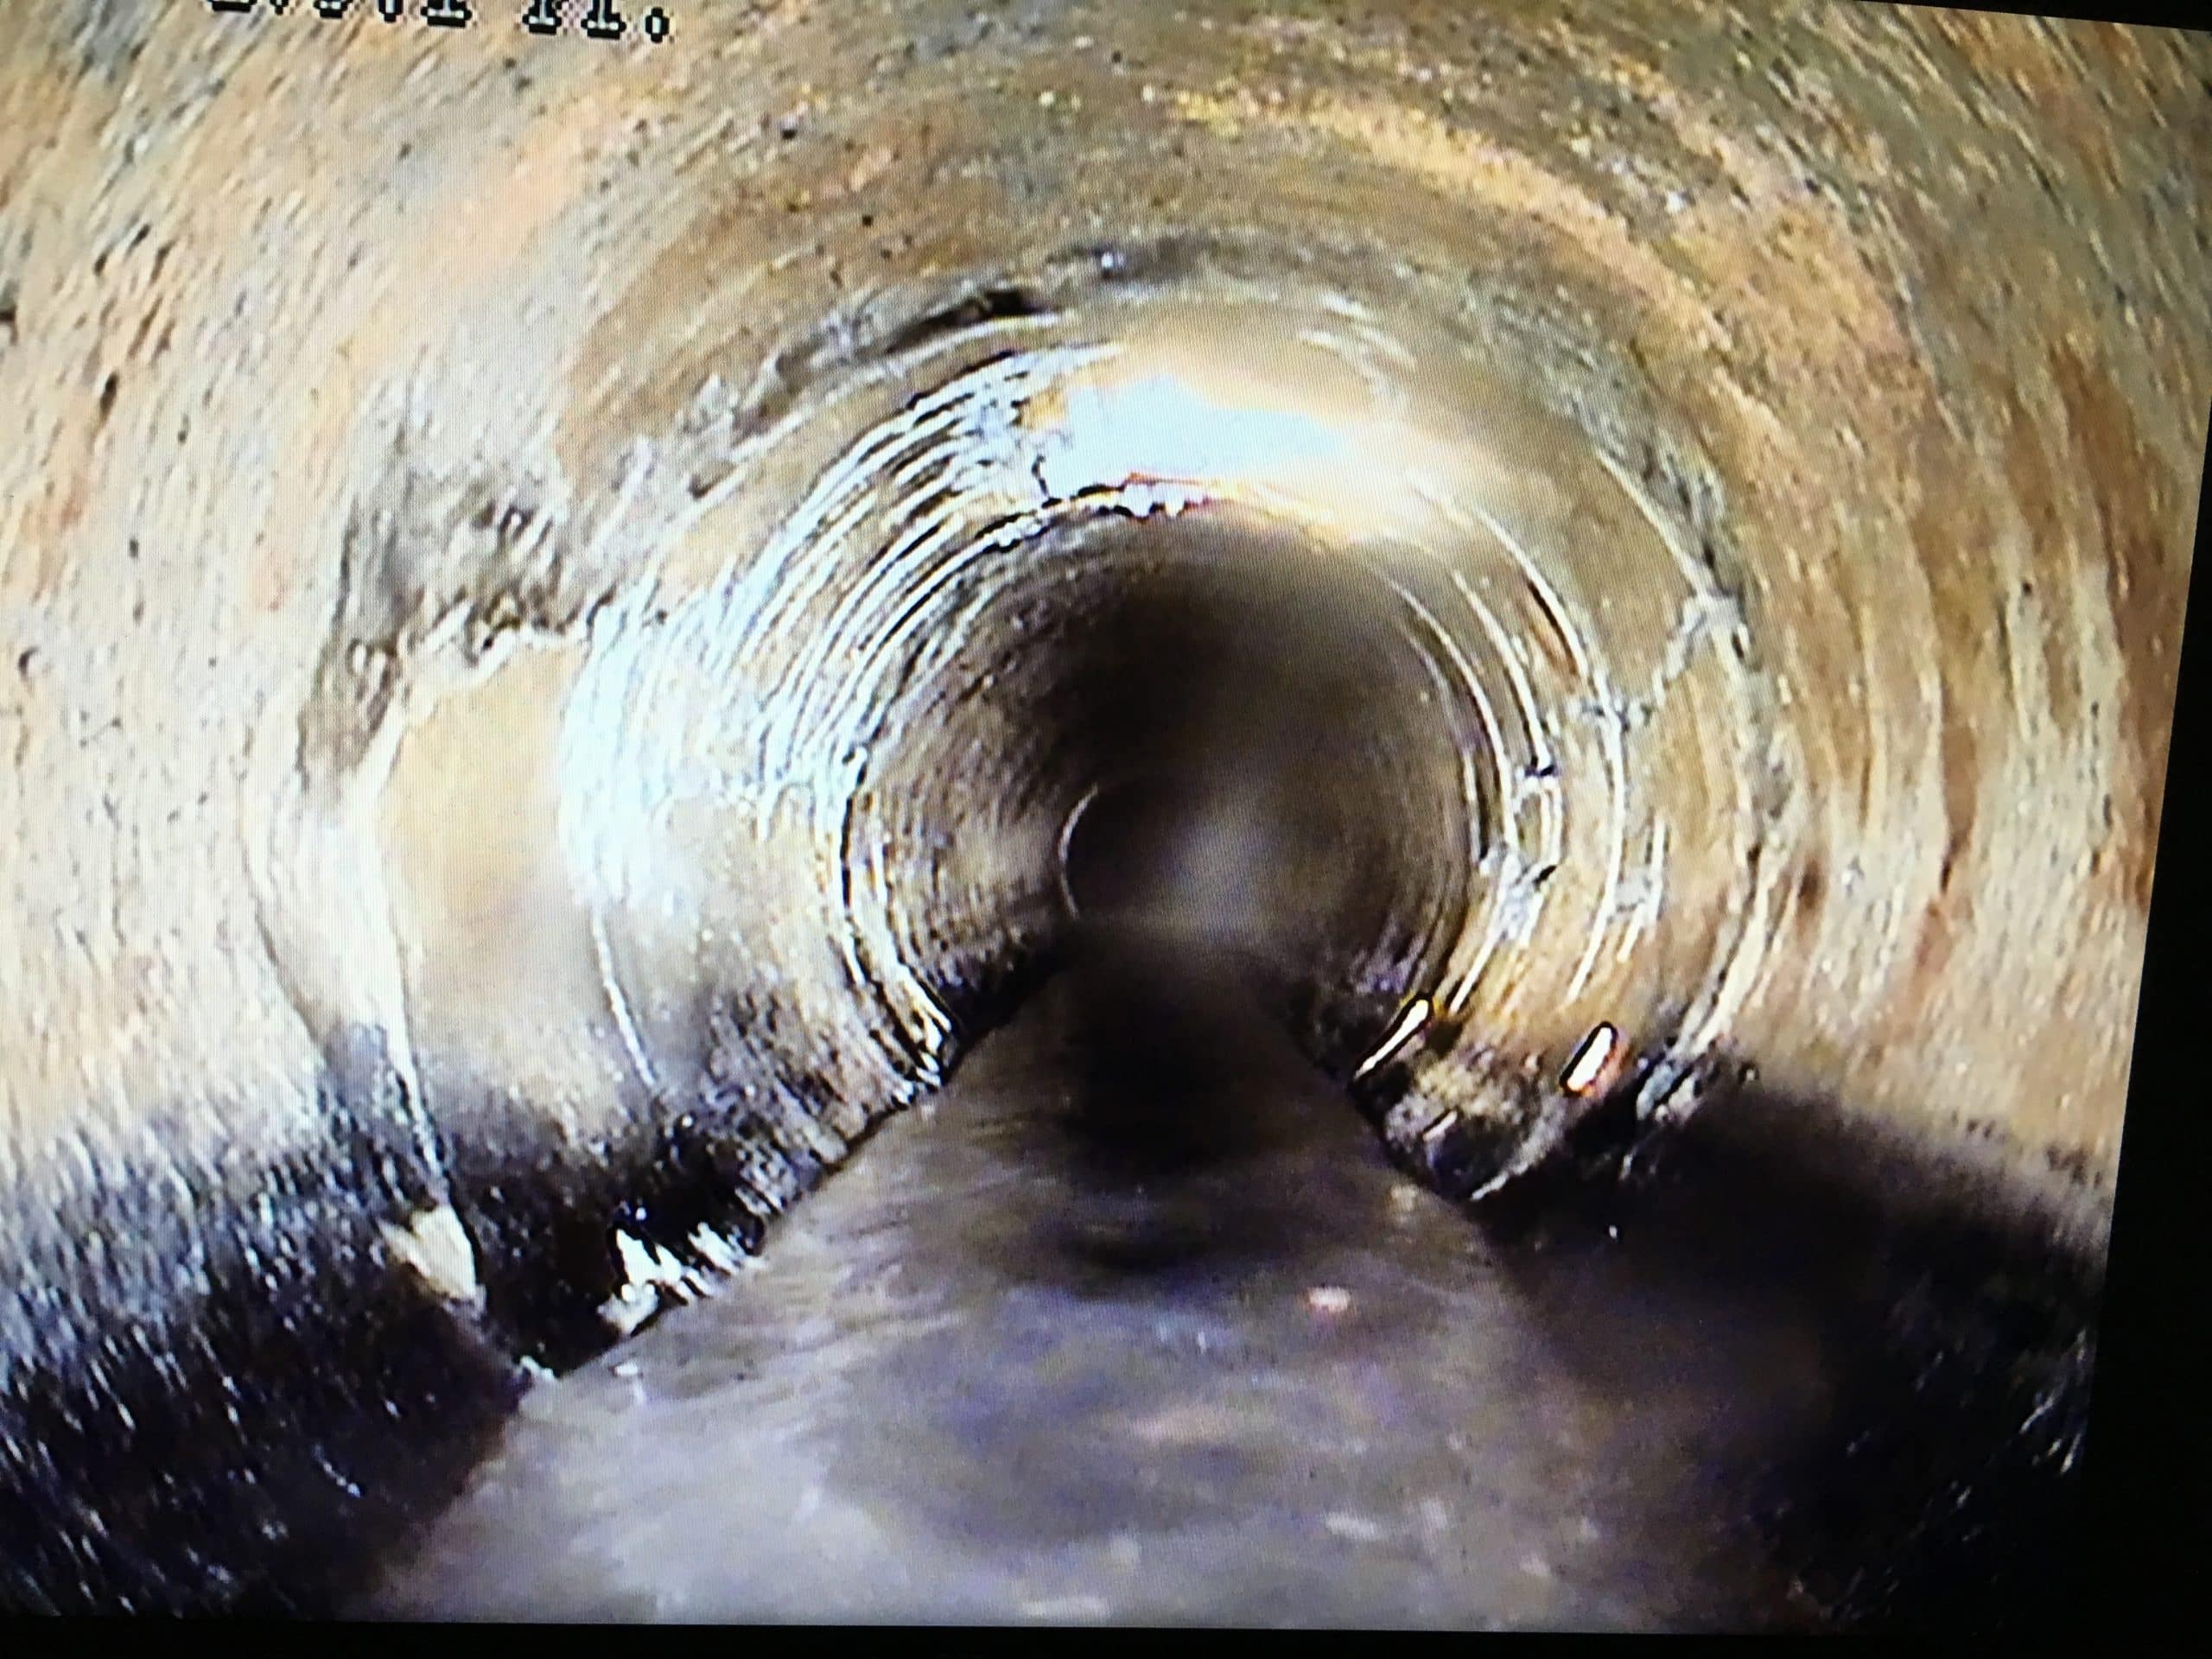 Sewer Repair Pipe Inspection